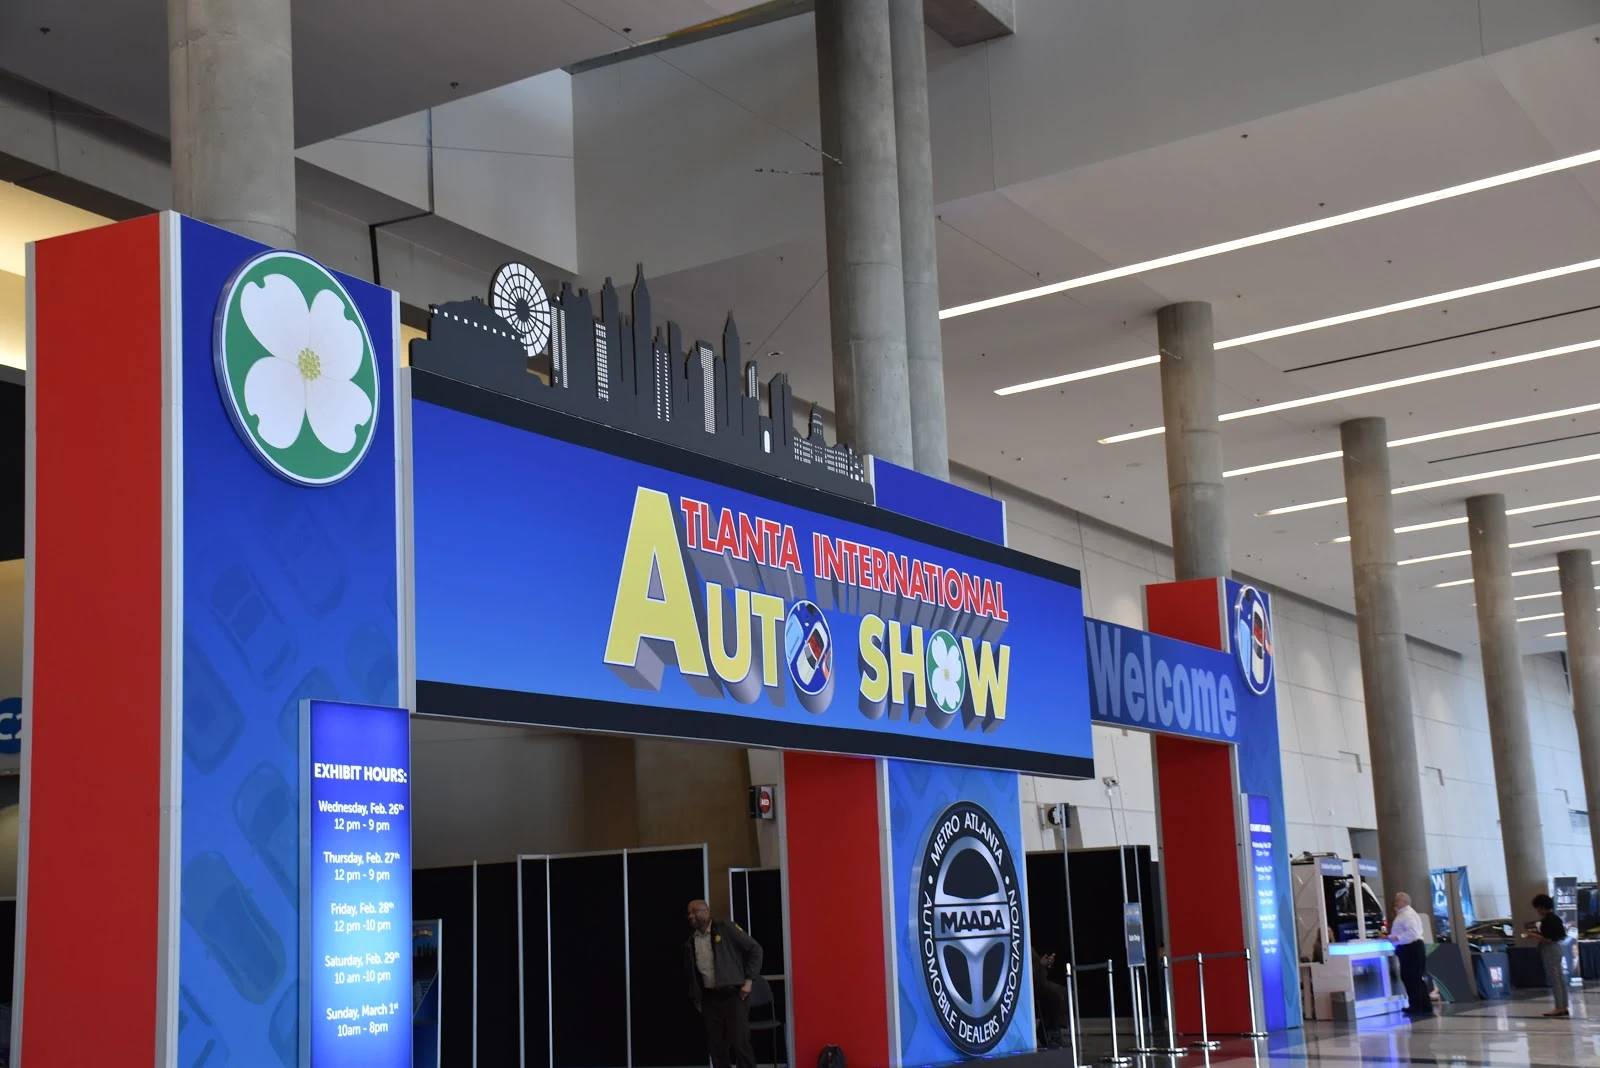 Check Out My Favorite Rides Presented at Atlanta International Auto Show